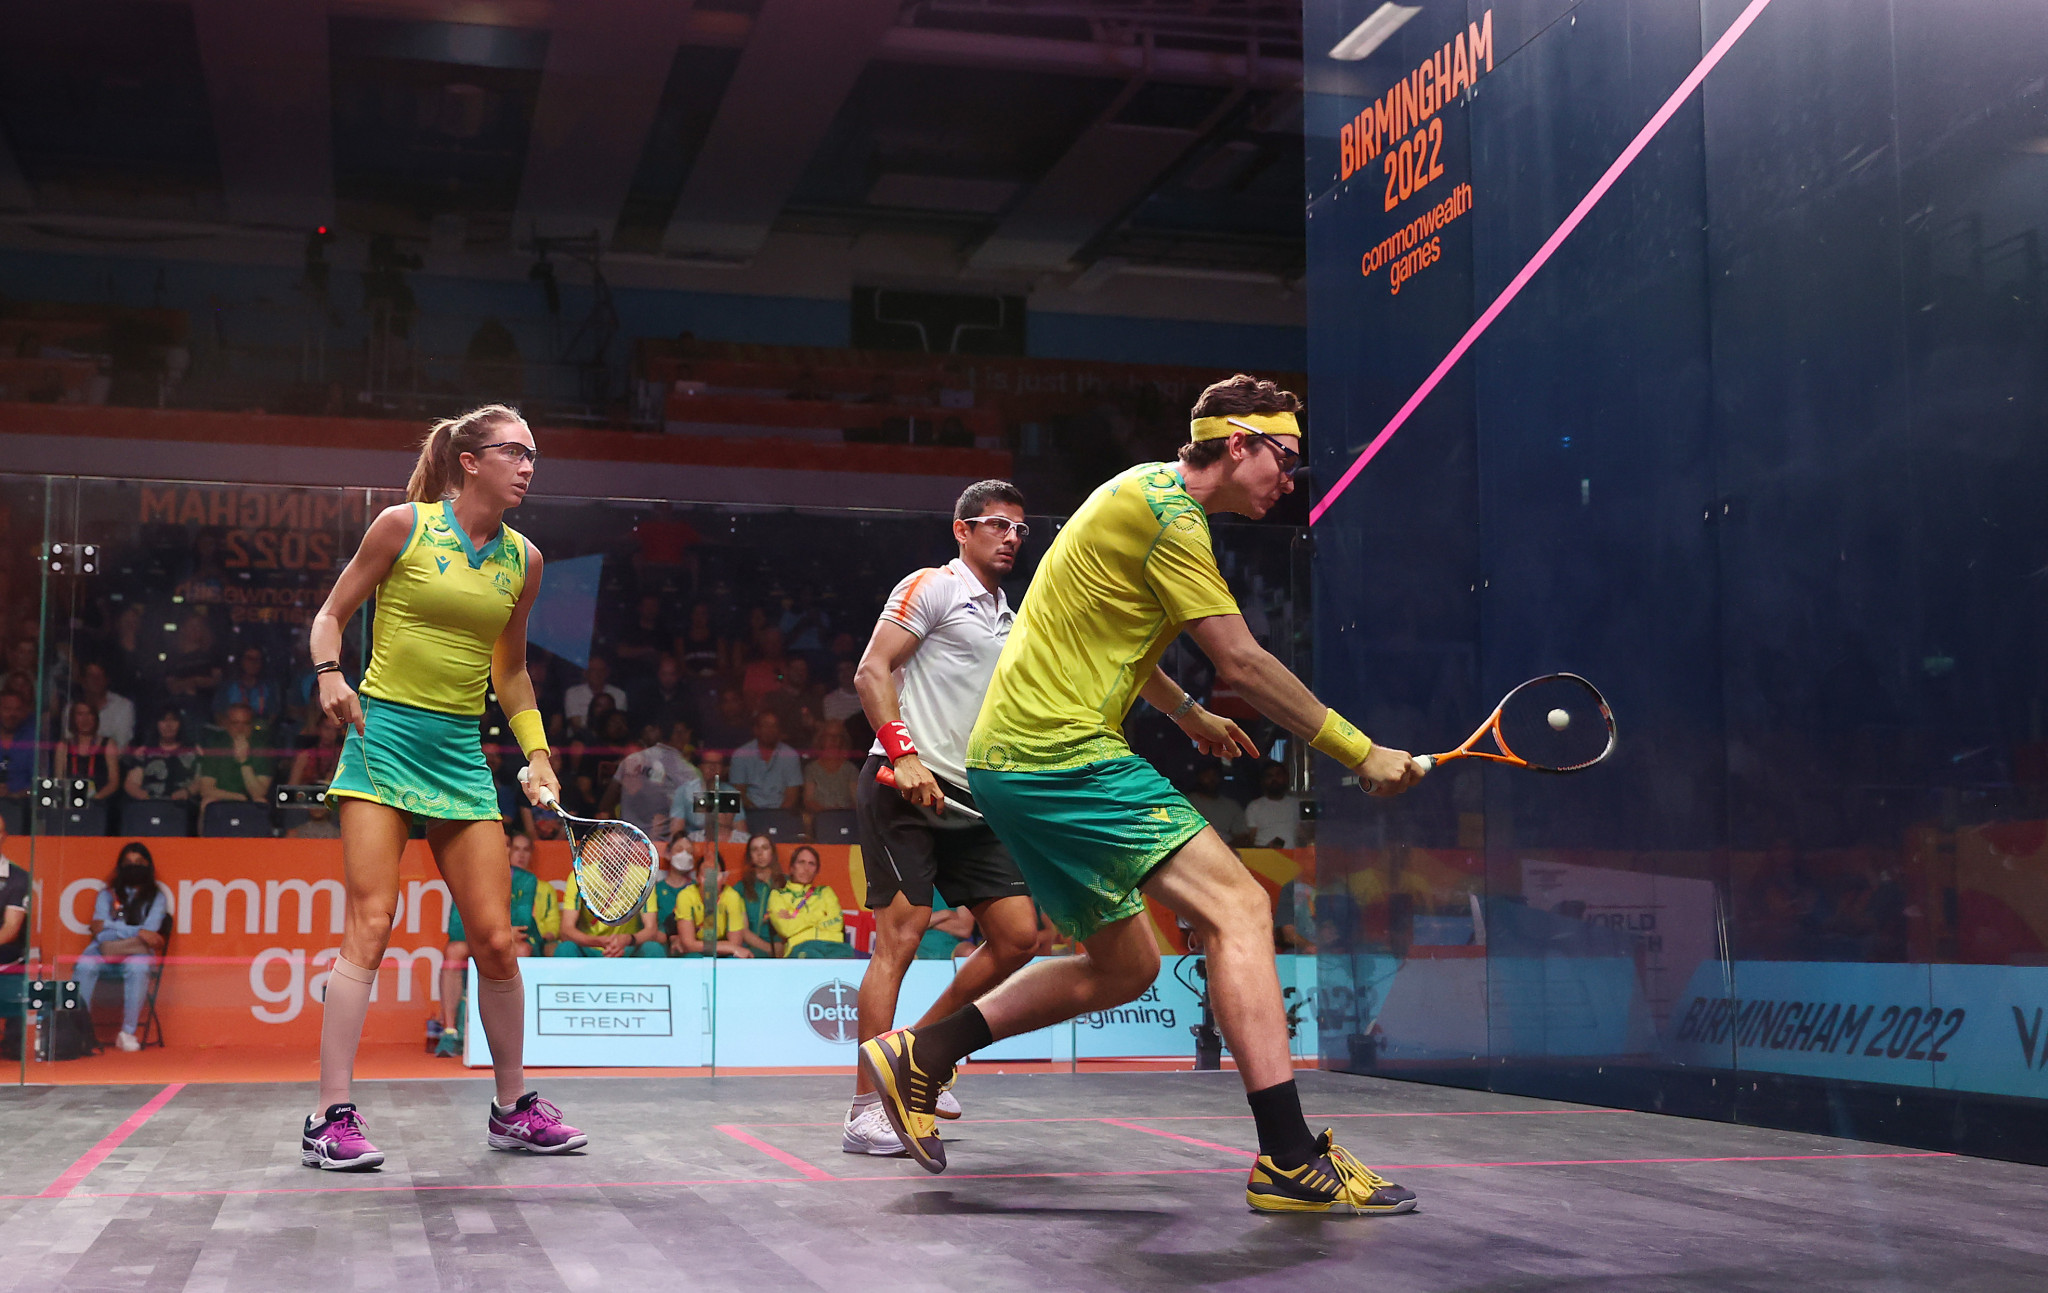 Squash has been on the Commonwealth Games programme since Kuala Lumpur 1998, and Squash Australia hopes staging the World Junior Championships in Melbourne will benefit its athletes before Victoria 2026 ©Getty Images